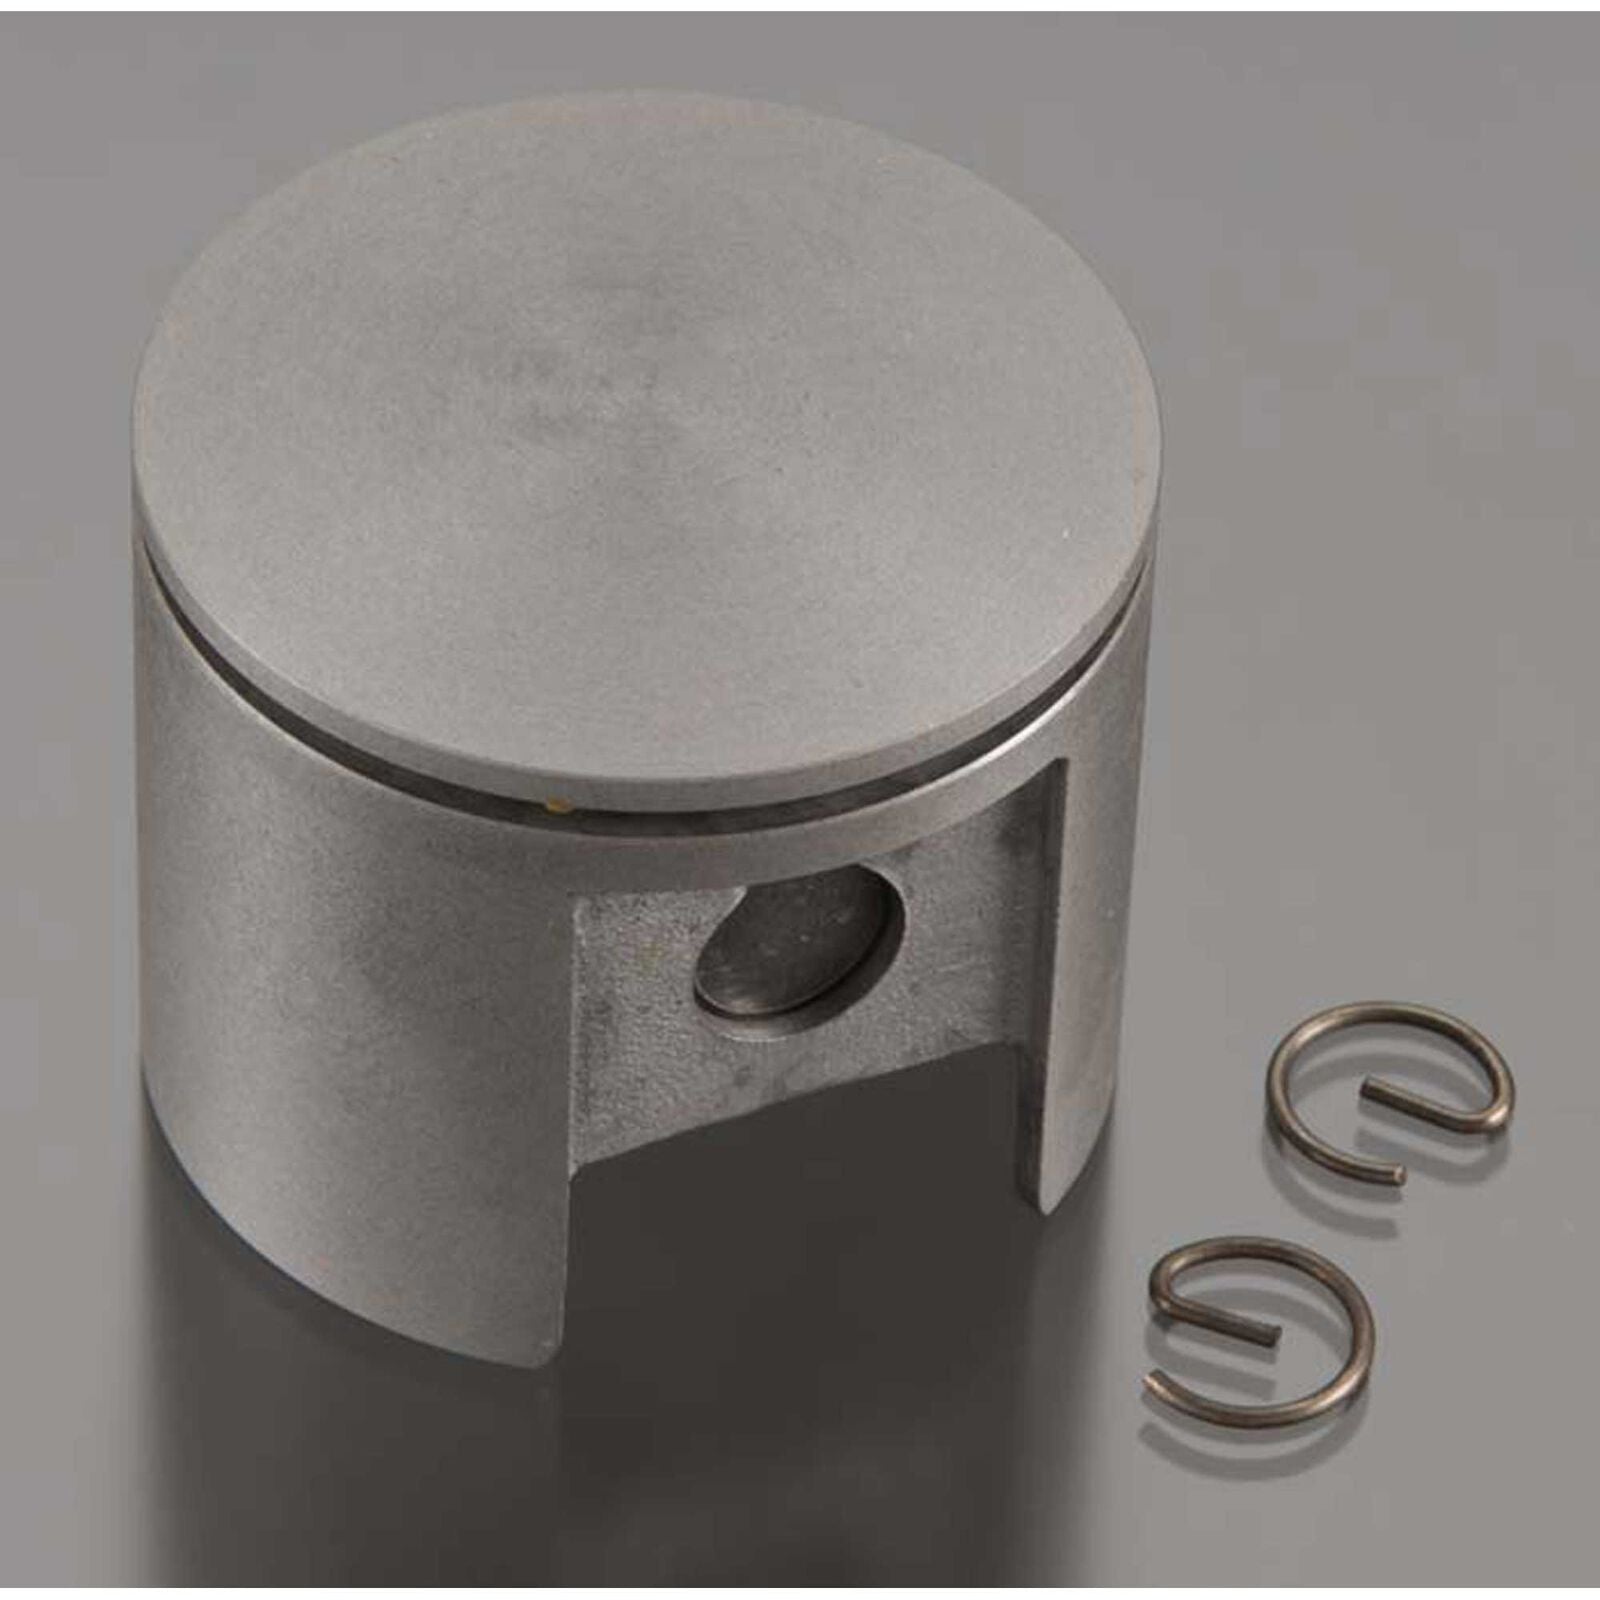 DLE ENGINES DLEG5720 Piston with Pin and Retainer: DLE 55-RA